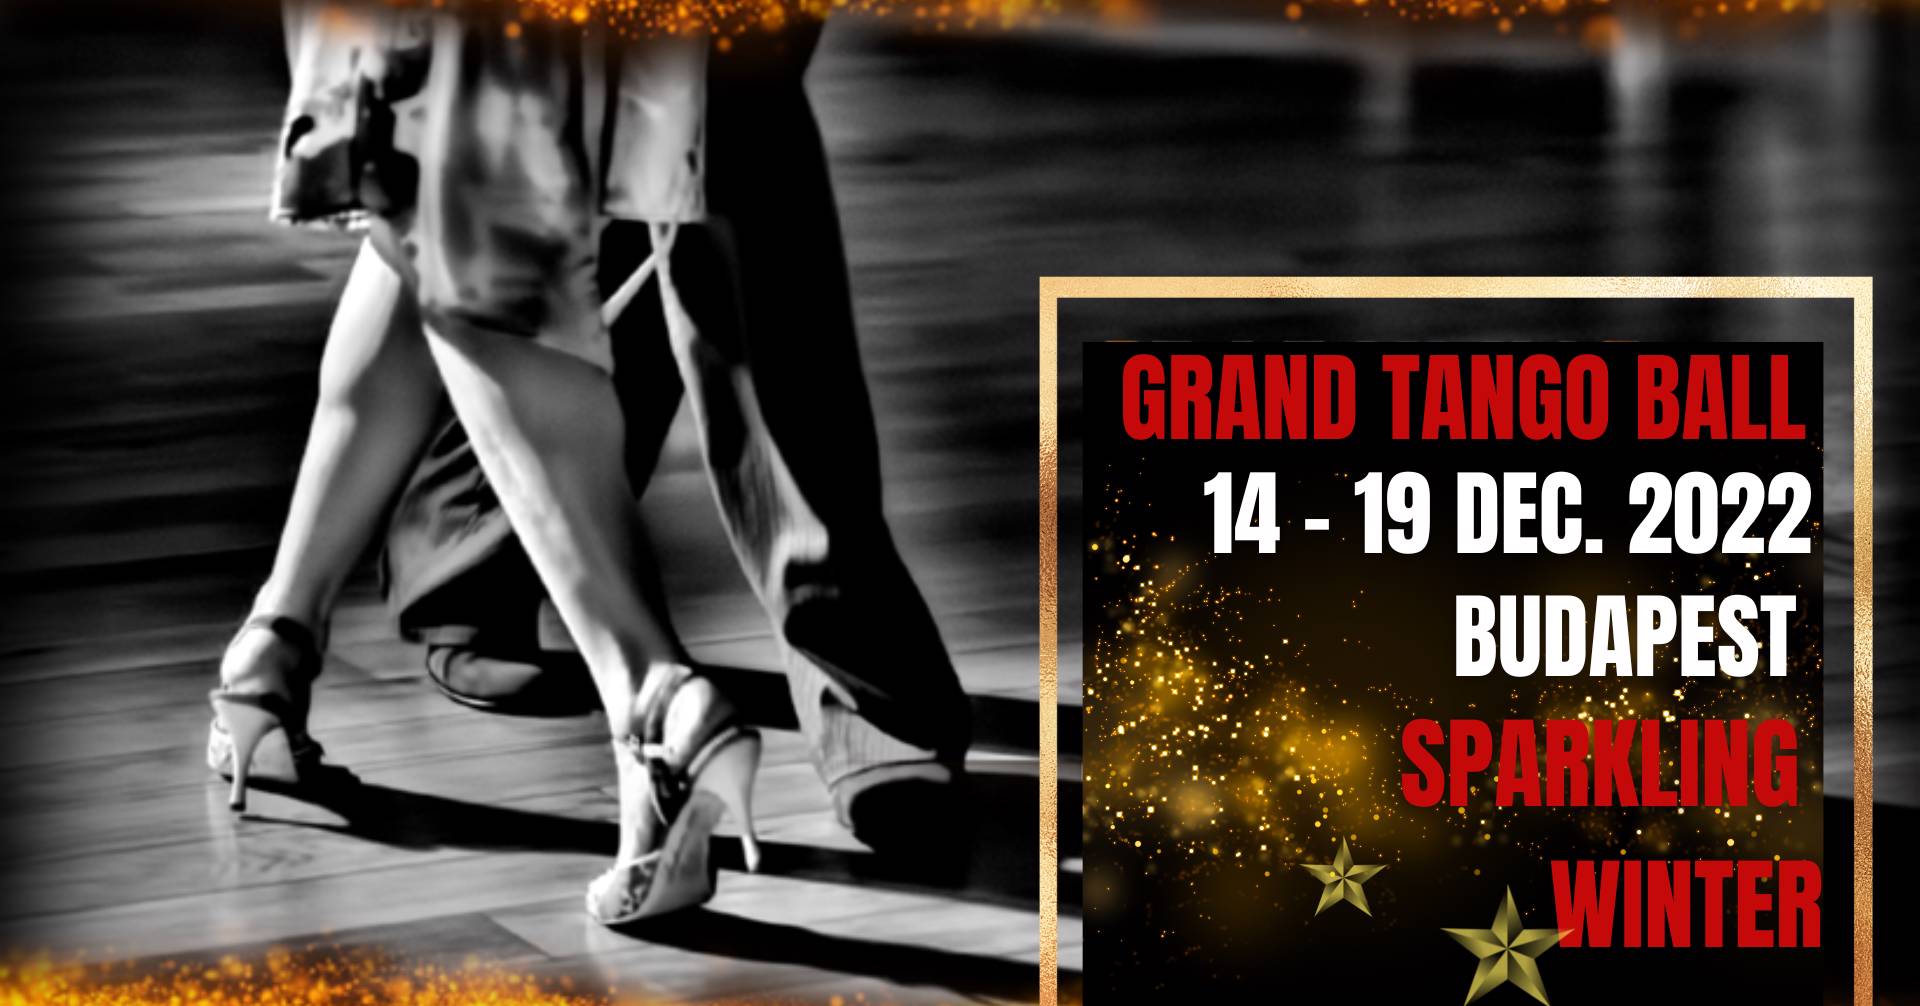 Cover The Budapest Grand Tango Ball Vacation 14 - 19, Dec. 2022